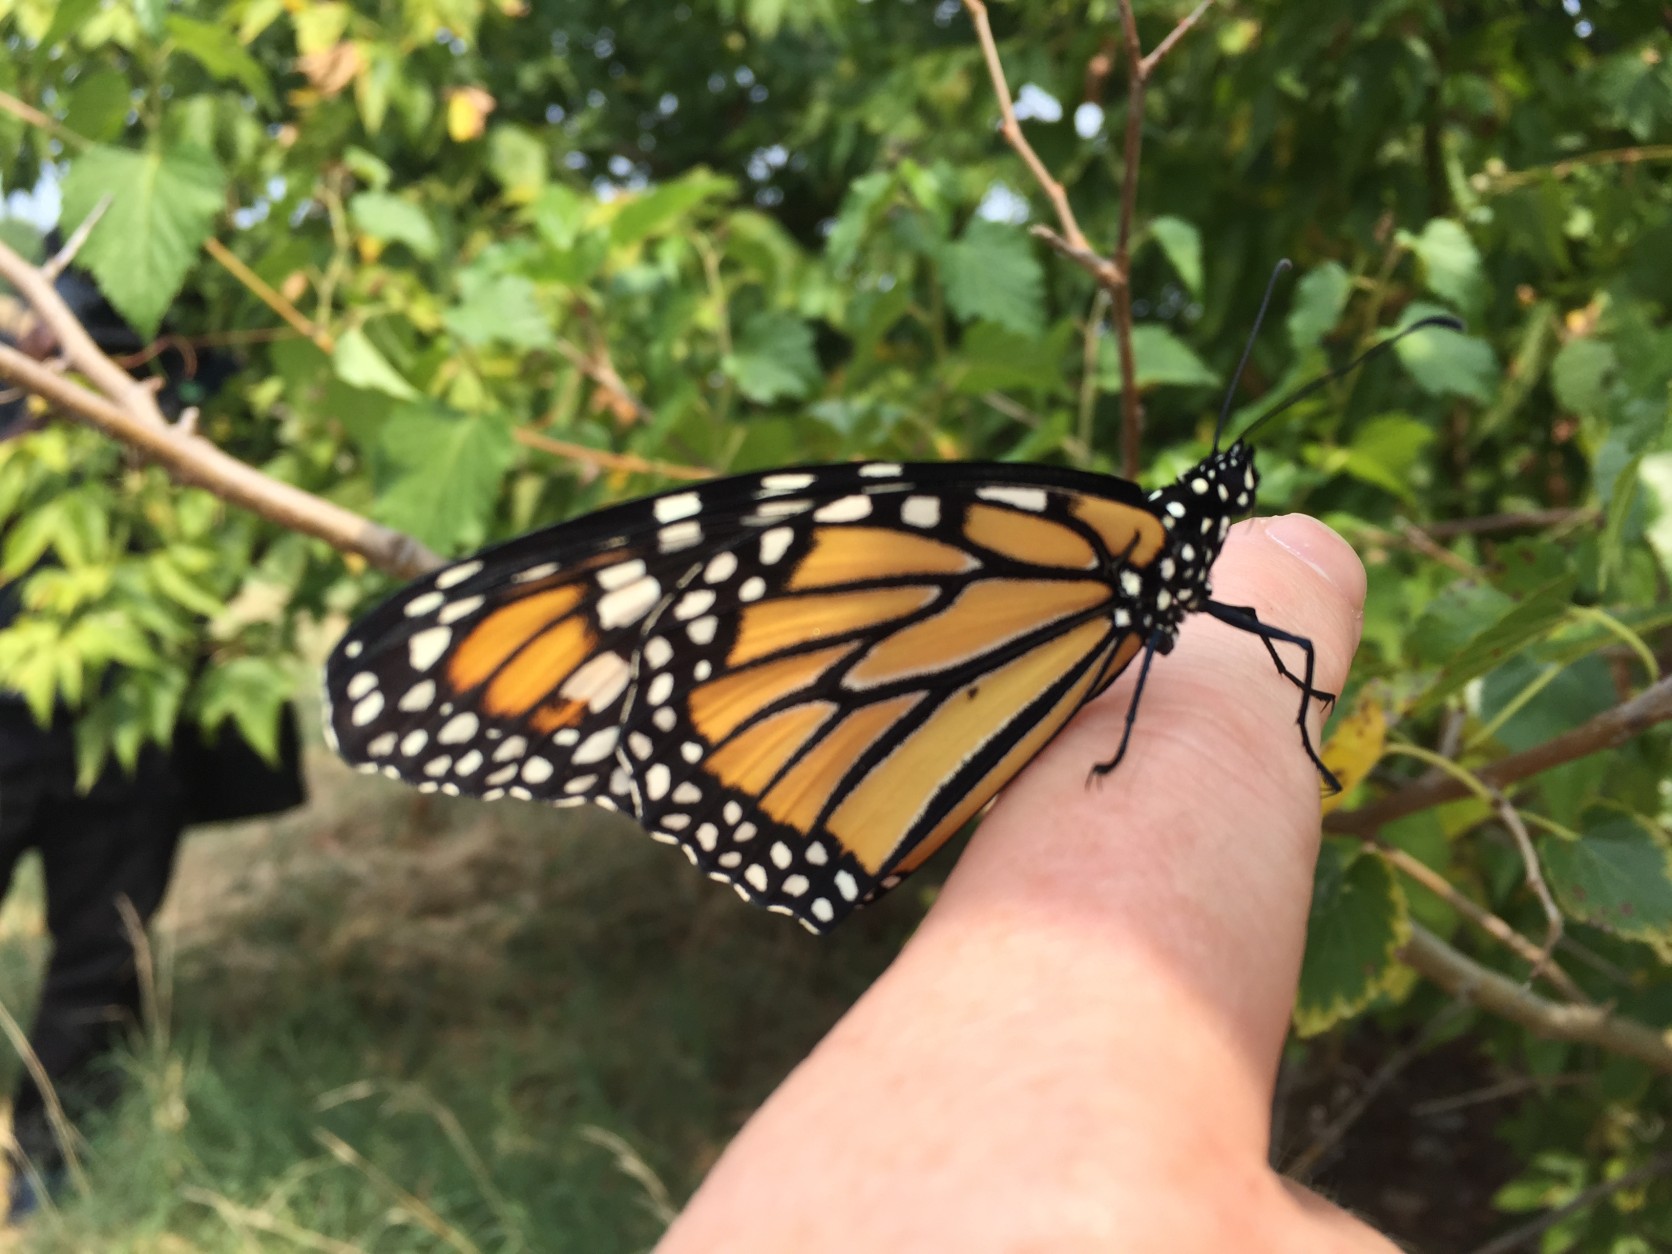 One of the monarch butterflies released Wednesday at Anacostia Park by members of DC's Department of Energy and Environment. (WTOP/Michelle Basch)